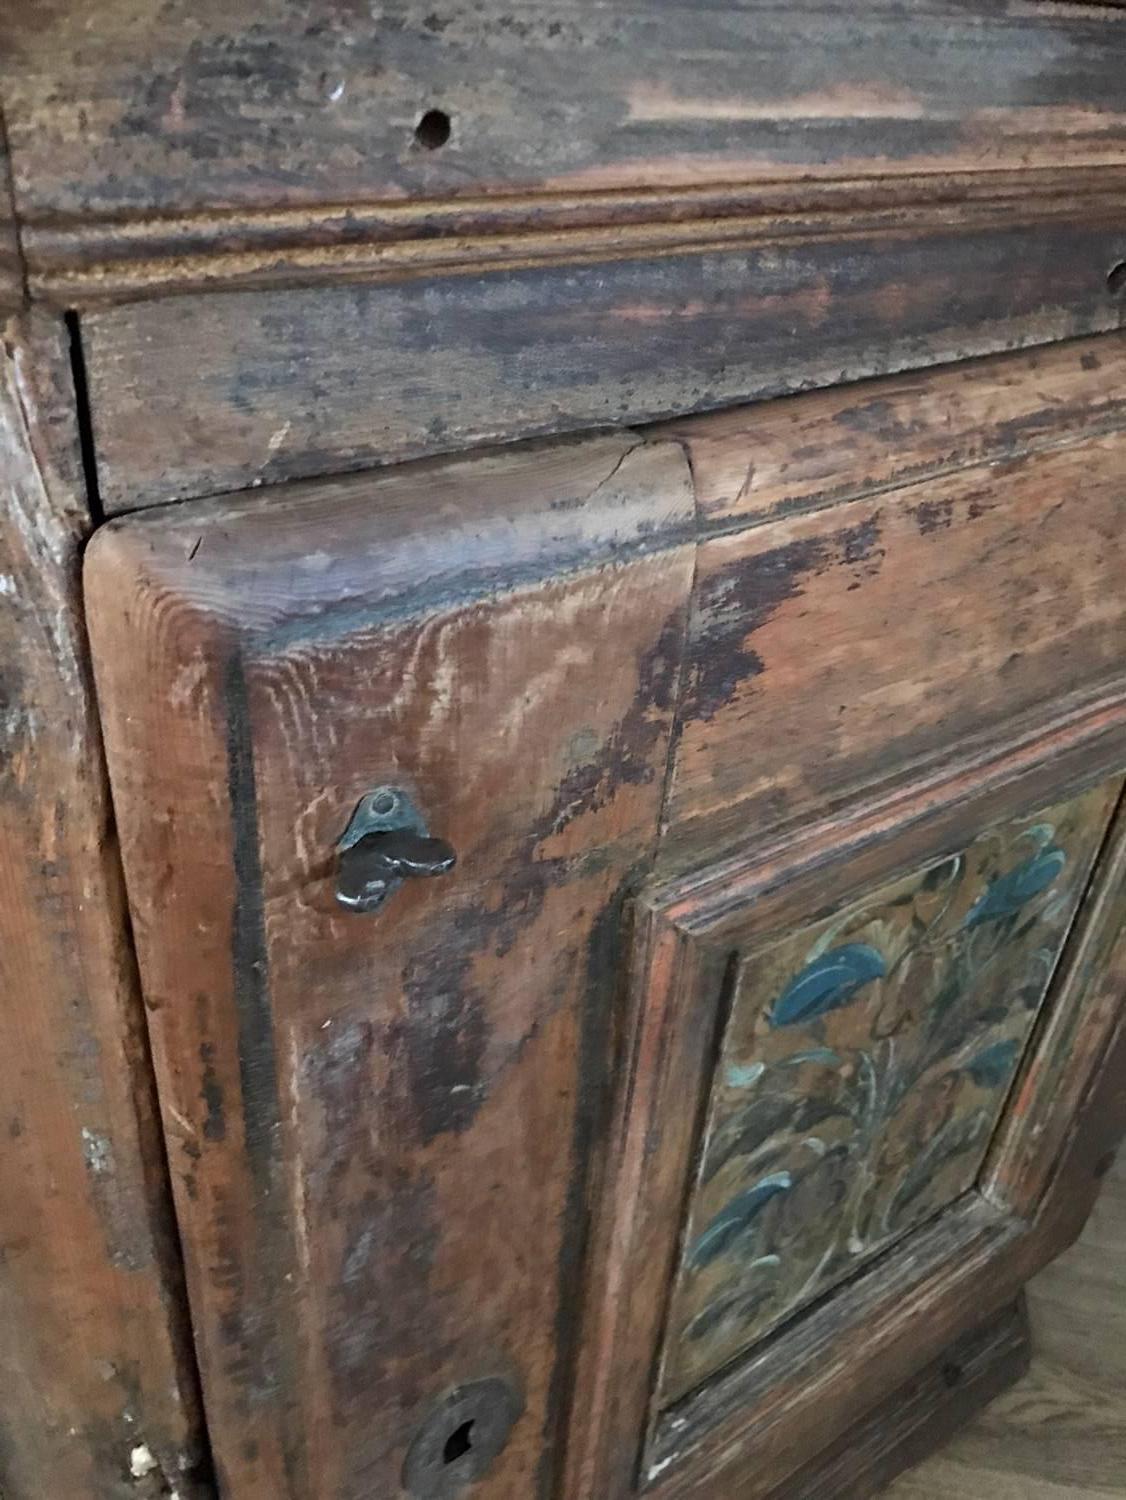 18th century Swedish cabinet, dated 1782 from Dalarna in Sweden. Scraped to original.
Fantastic patina and condition. Very rare!